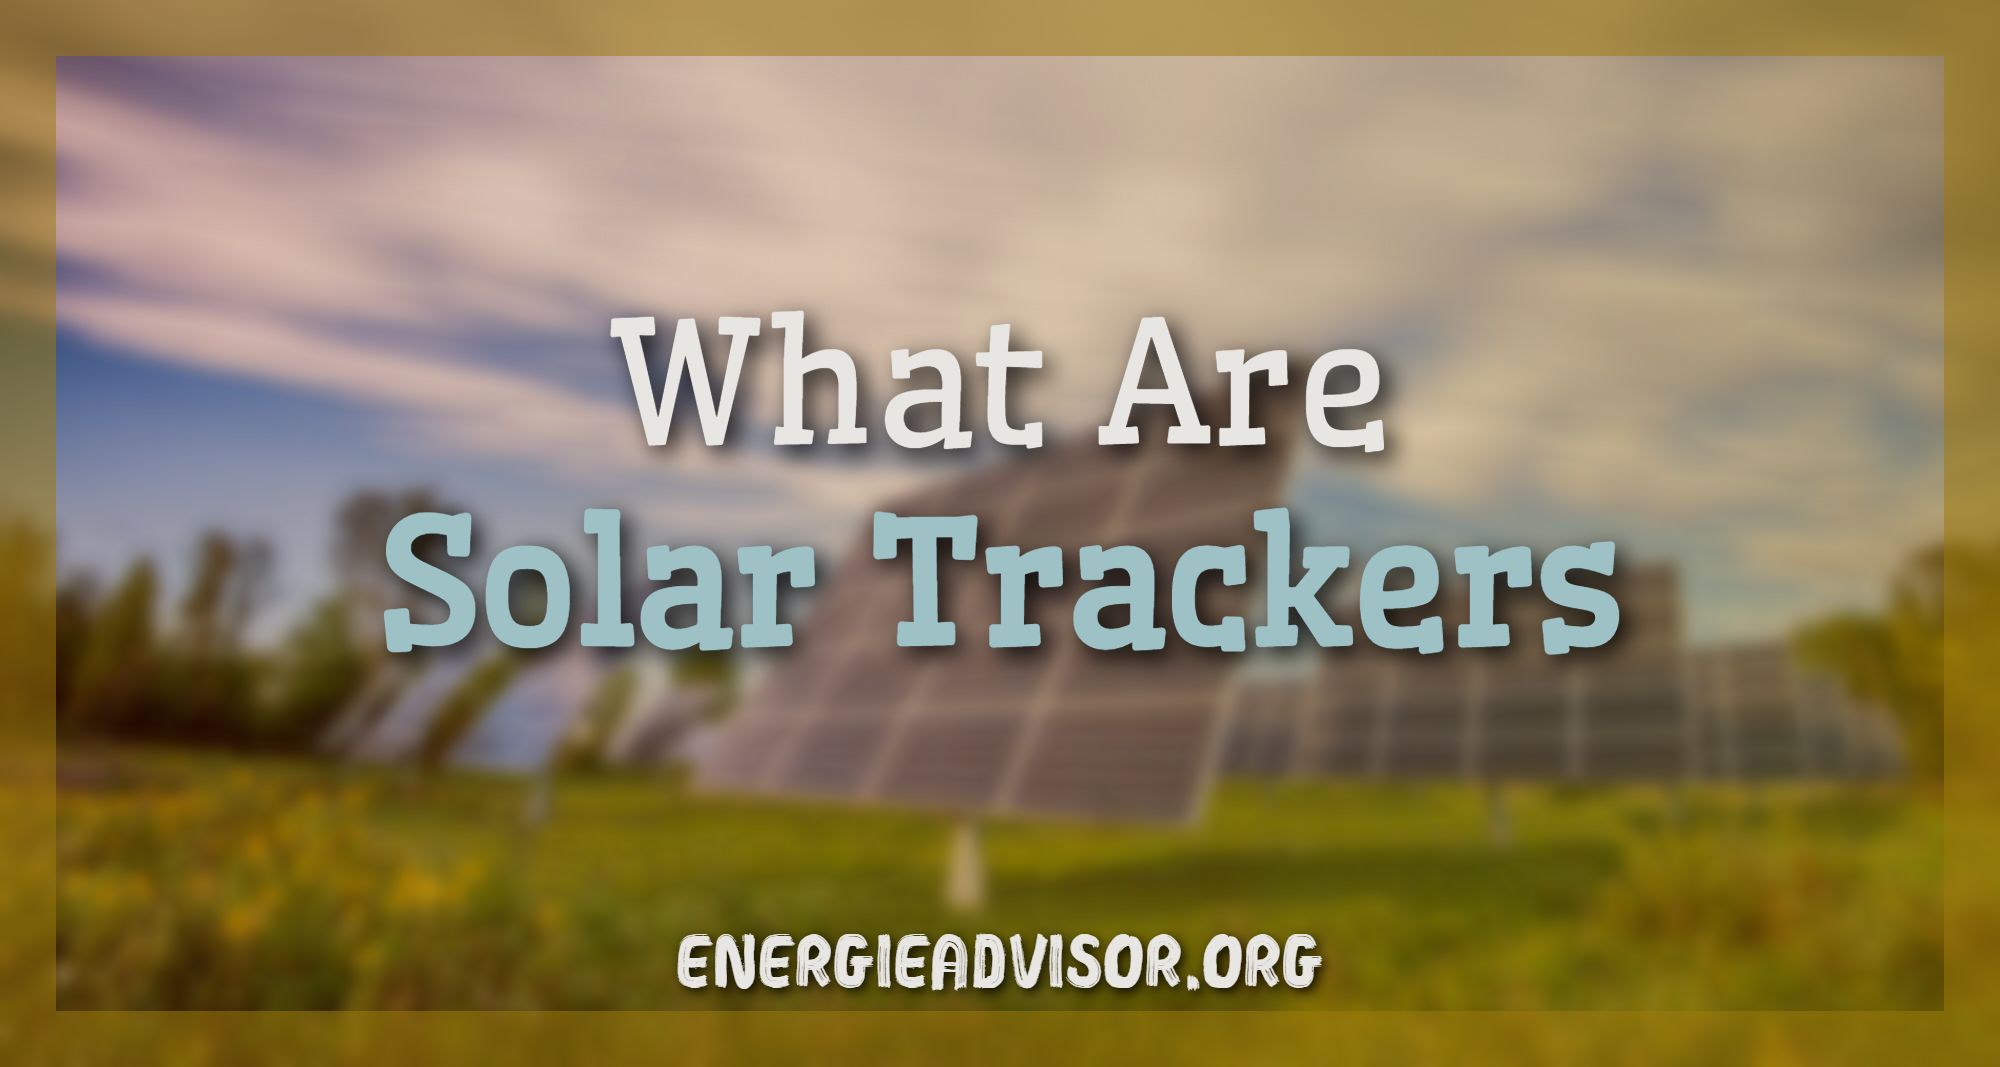 What Are Solar Trackers